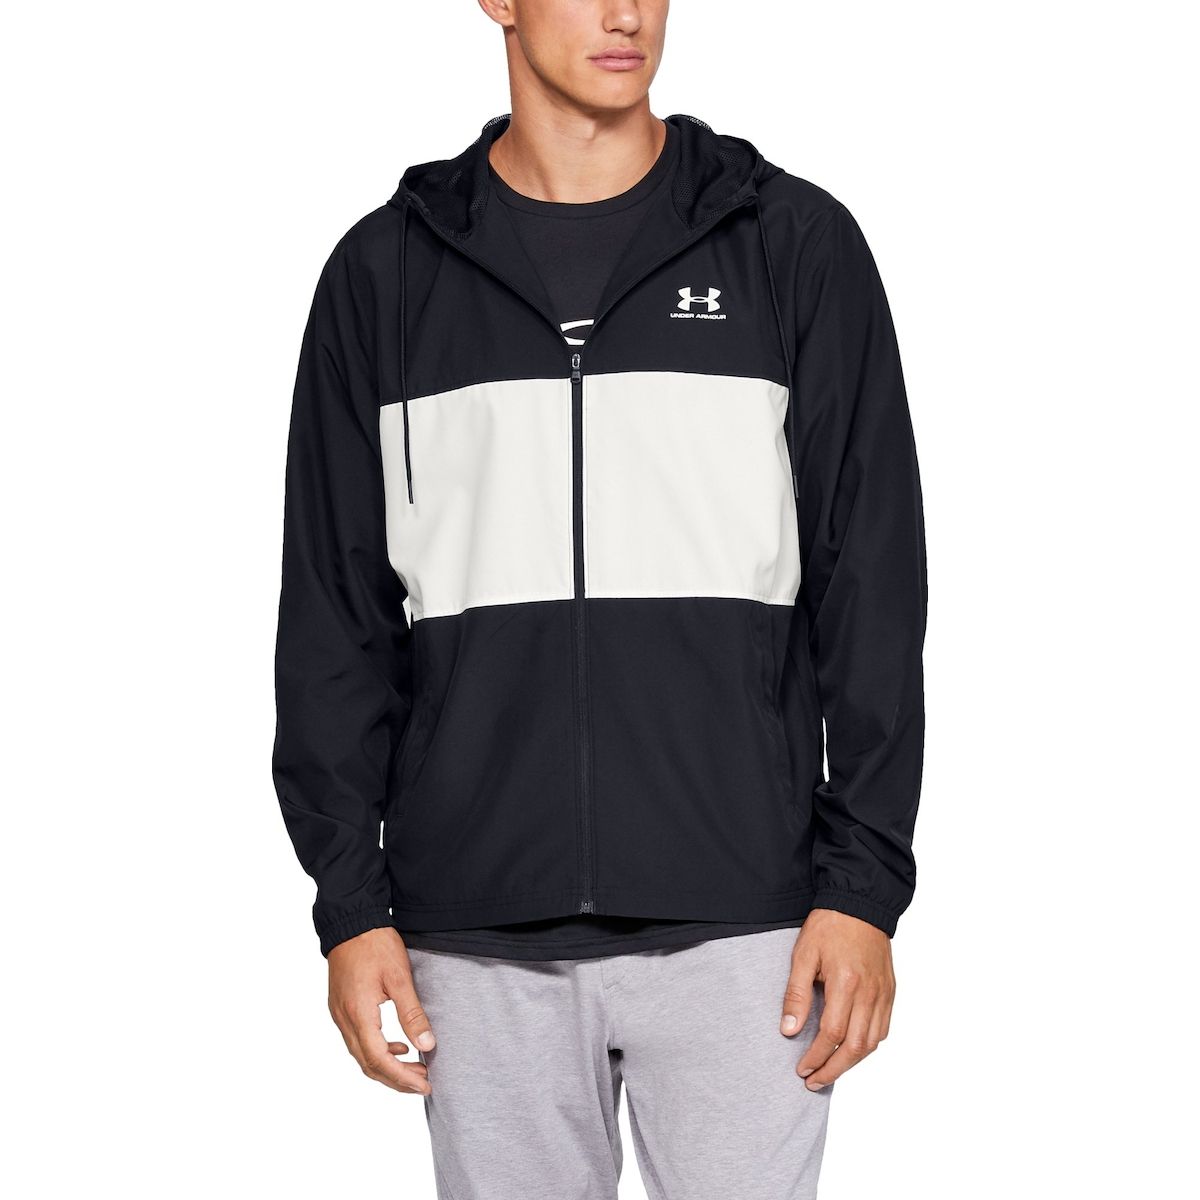 black and white under armour windbreaker Off 76% - www.loverethymno.com